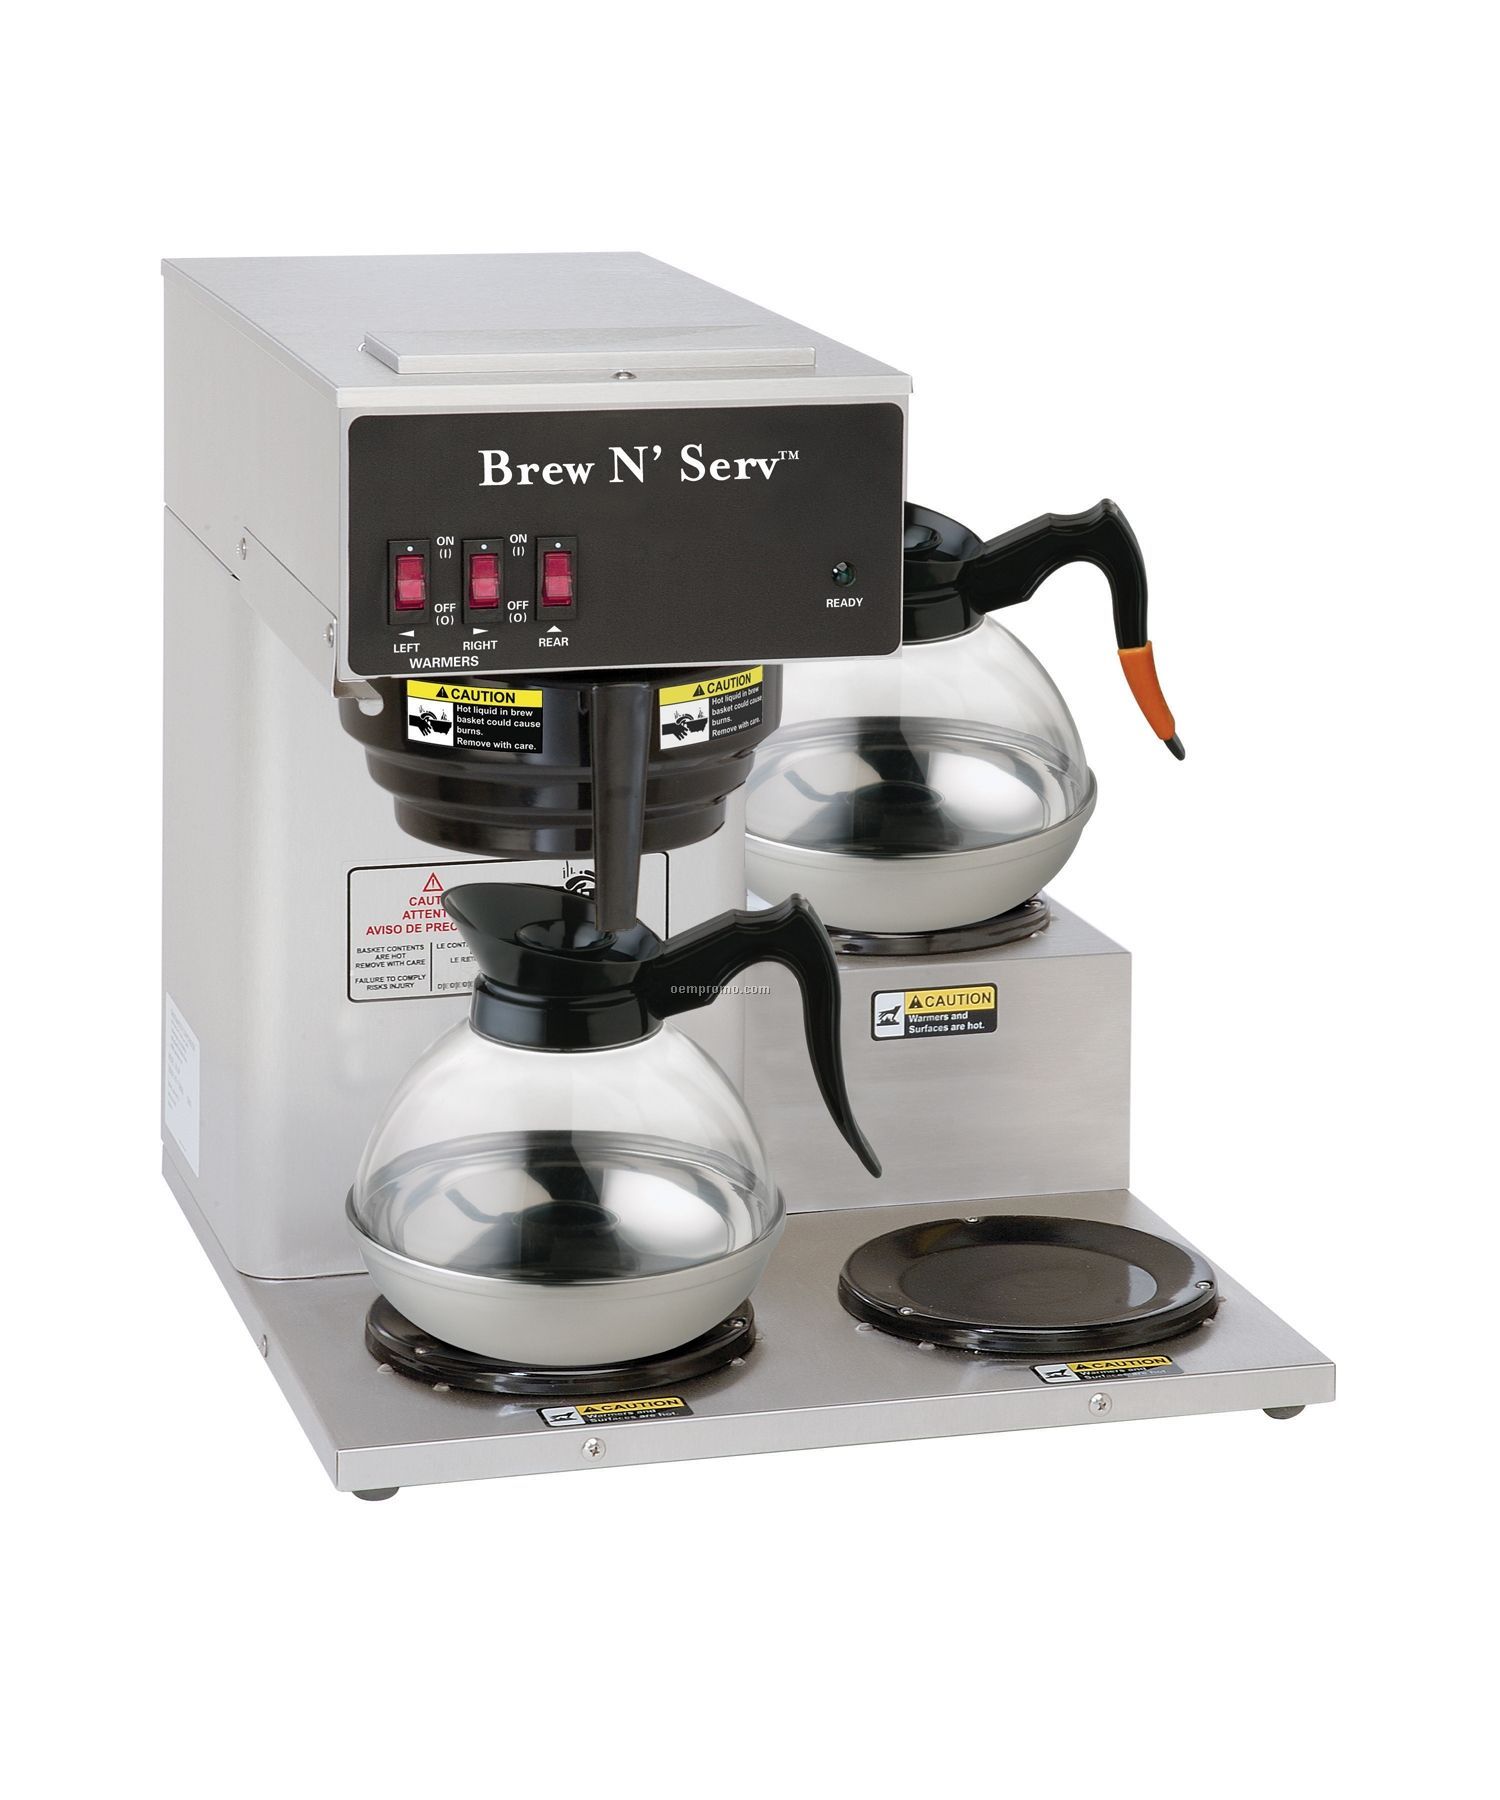 Brew N' Serv 3 Warmer Pour Over Brewer Package